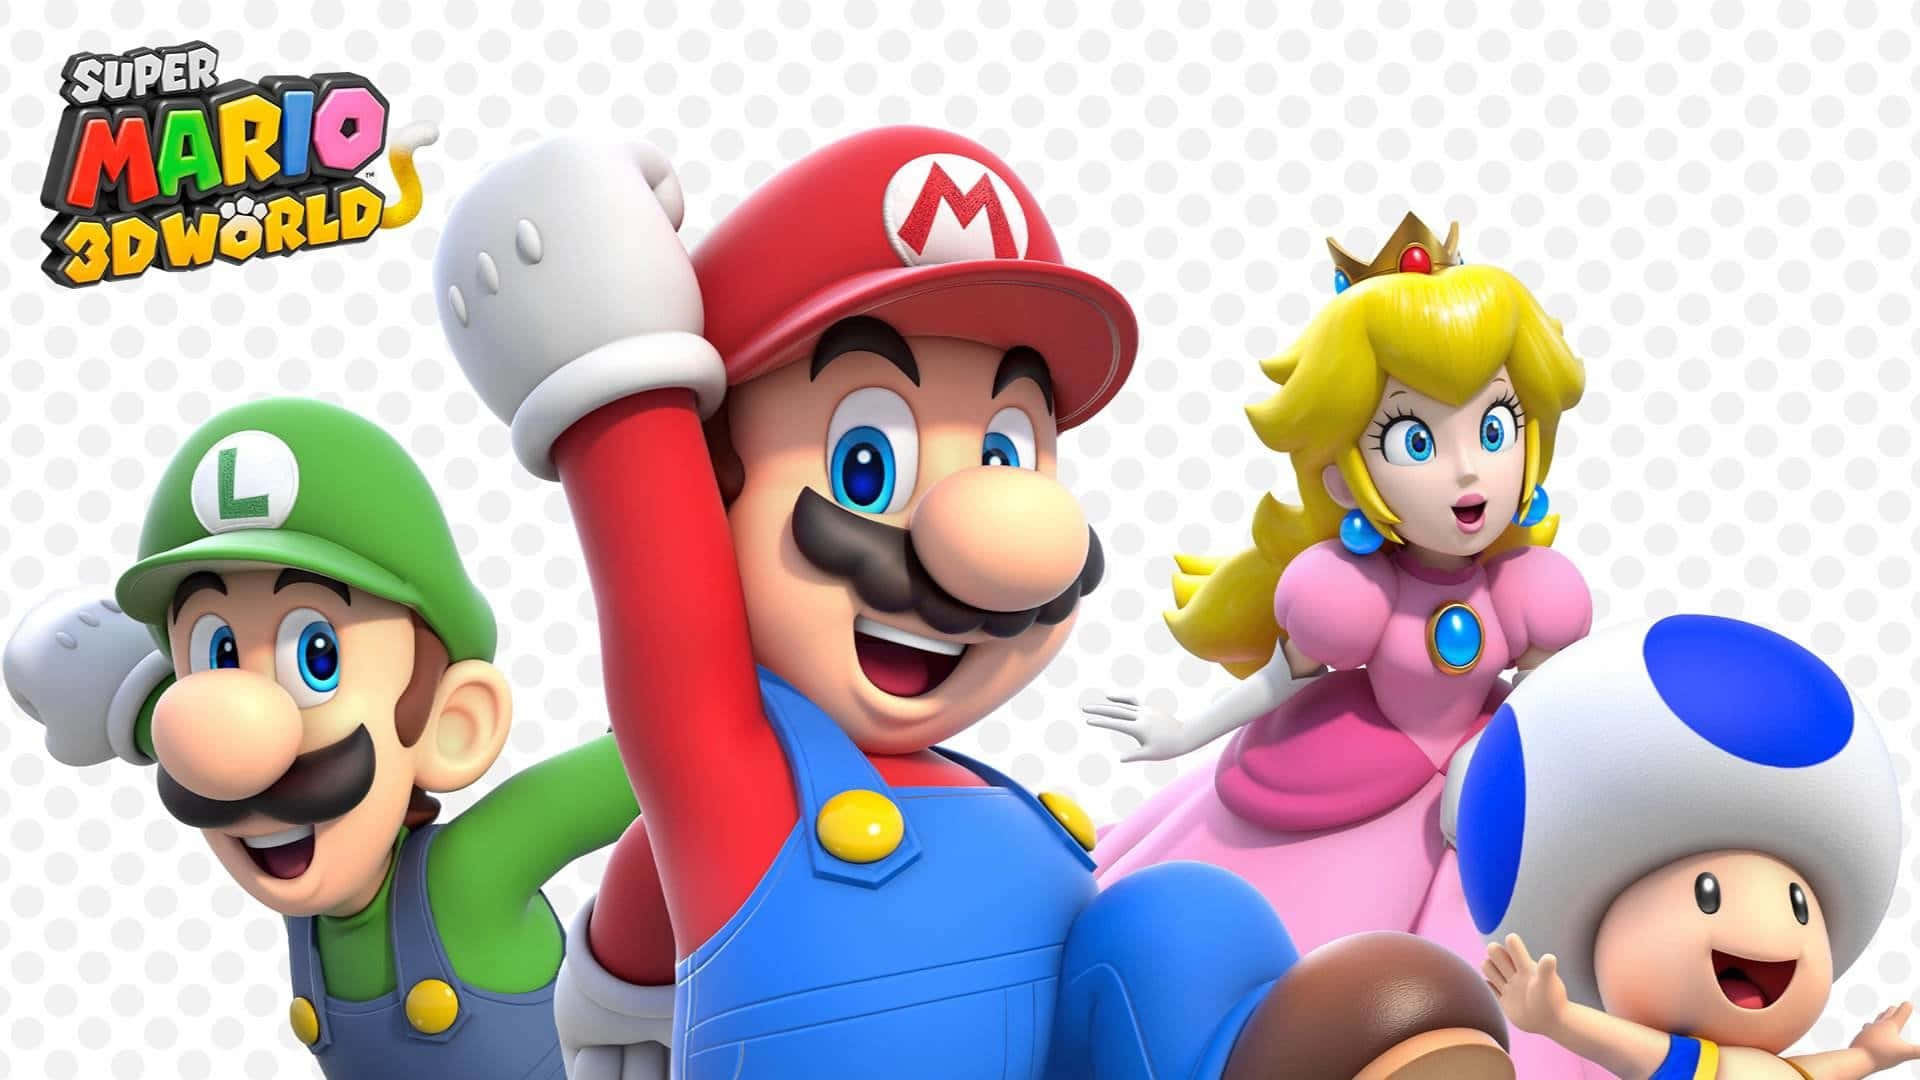 Experience classic Super Mario 3D with brand new worlds, stages and powerups! Wallpaper